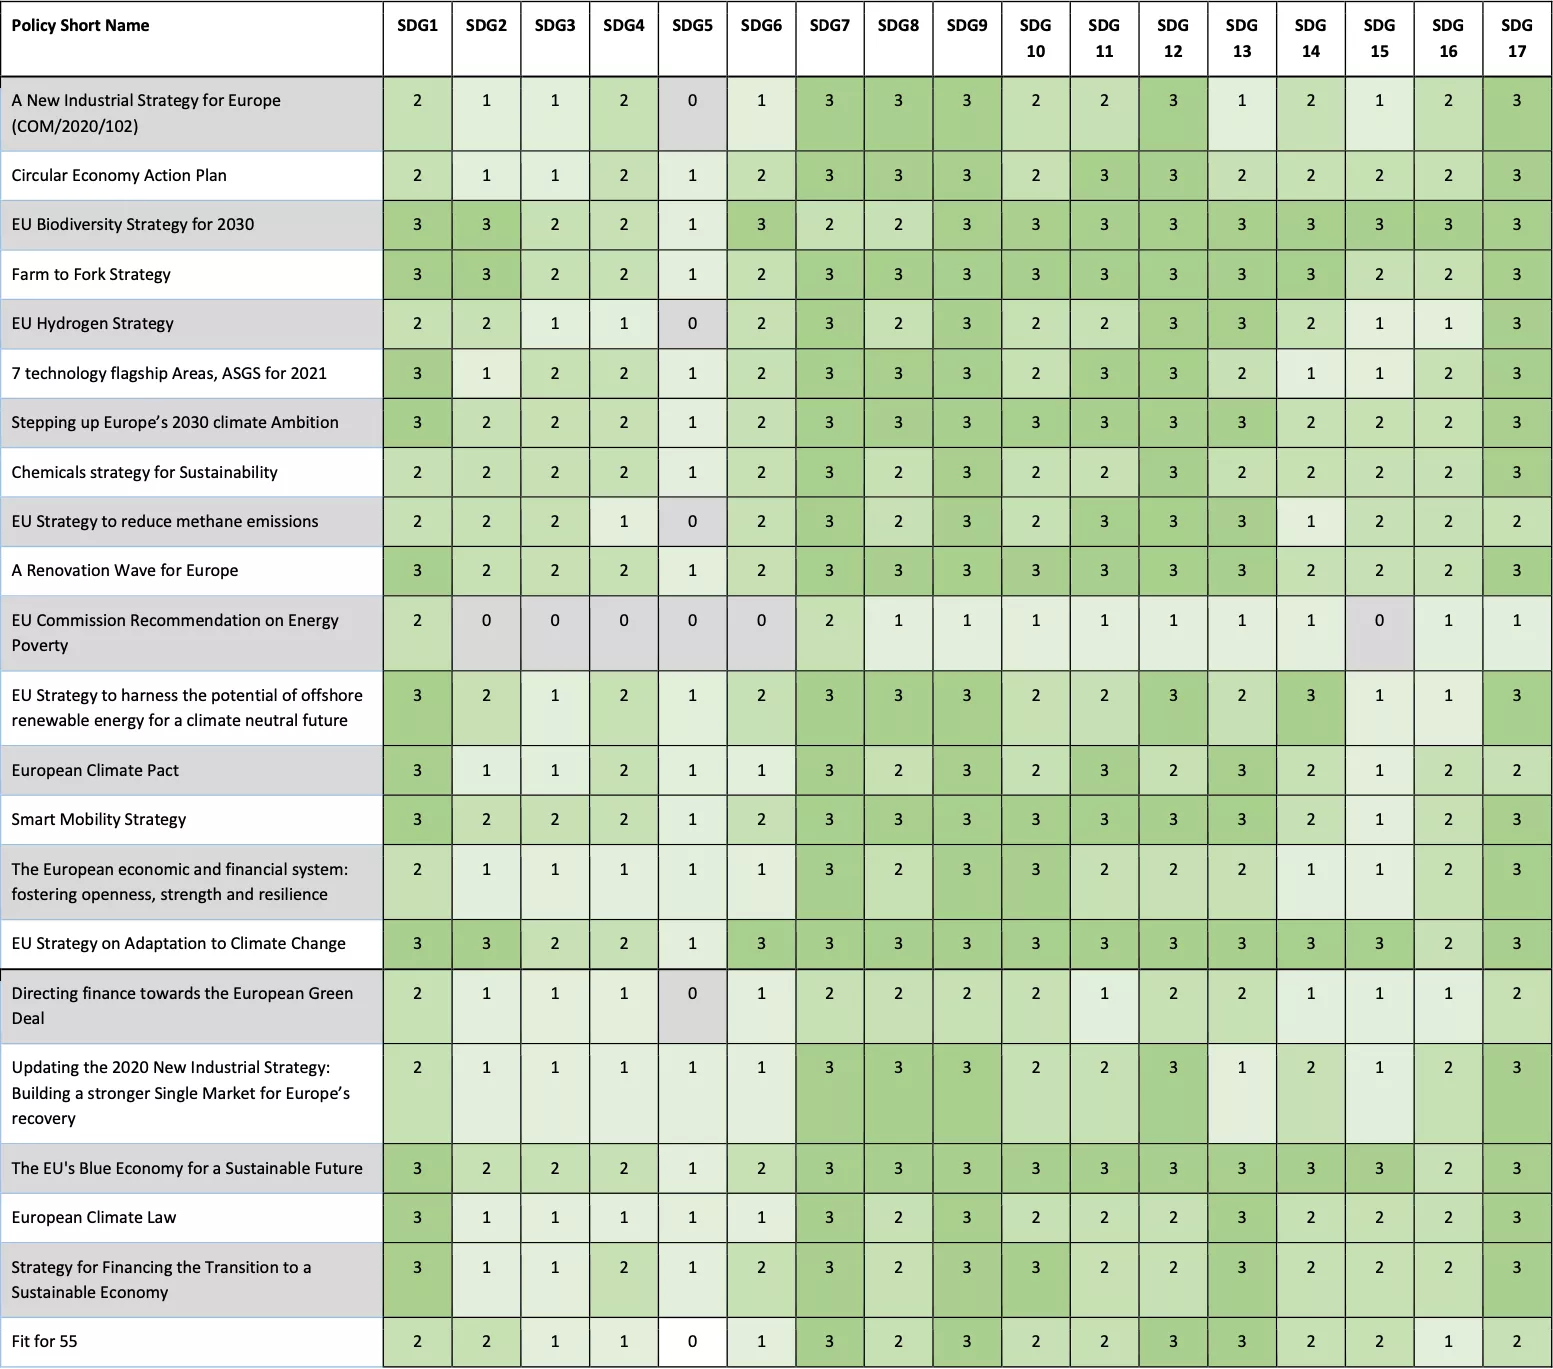 Table 5 Correlation between Policy Documents and the SDGs using Information Retrieval